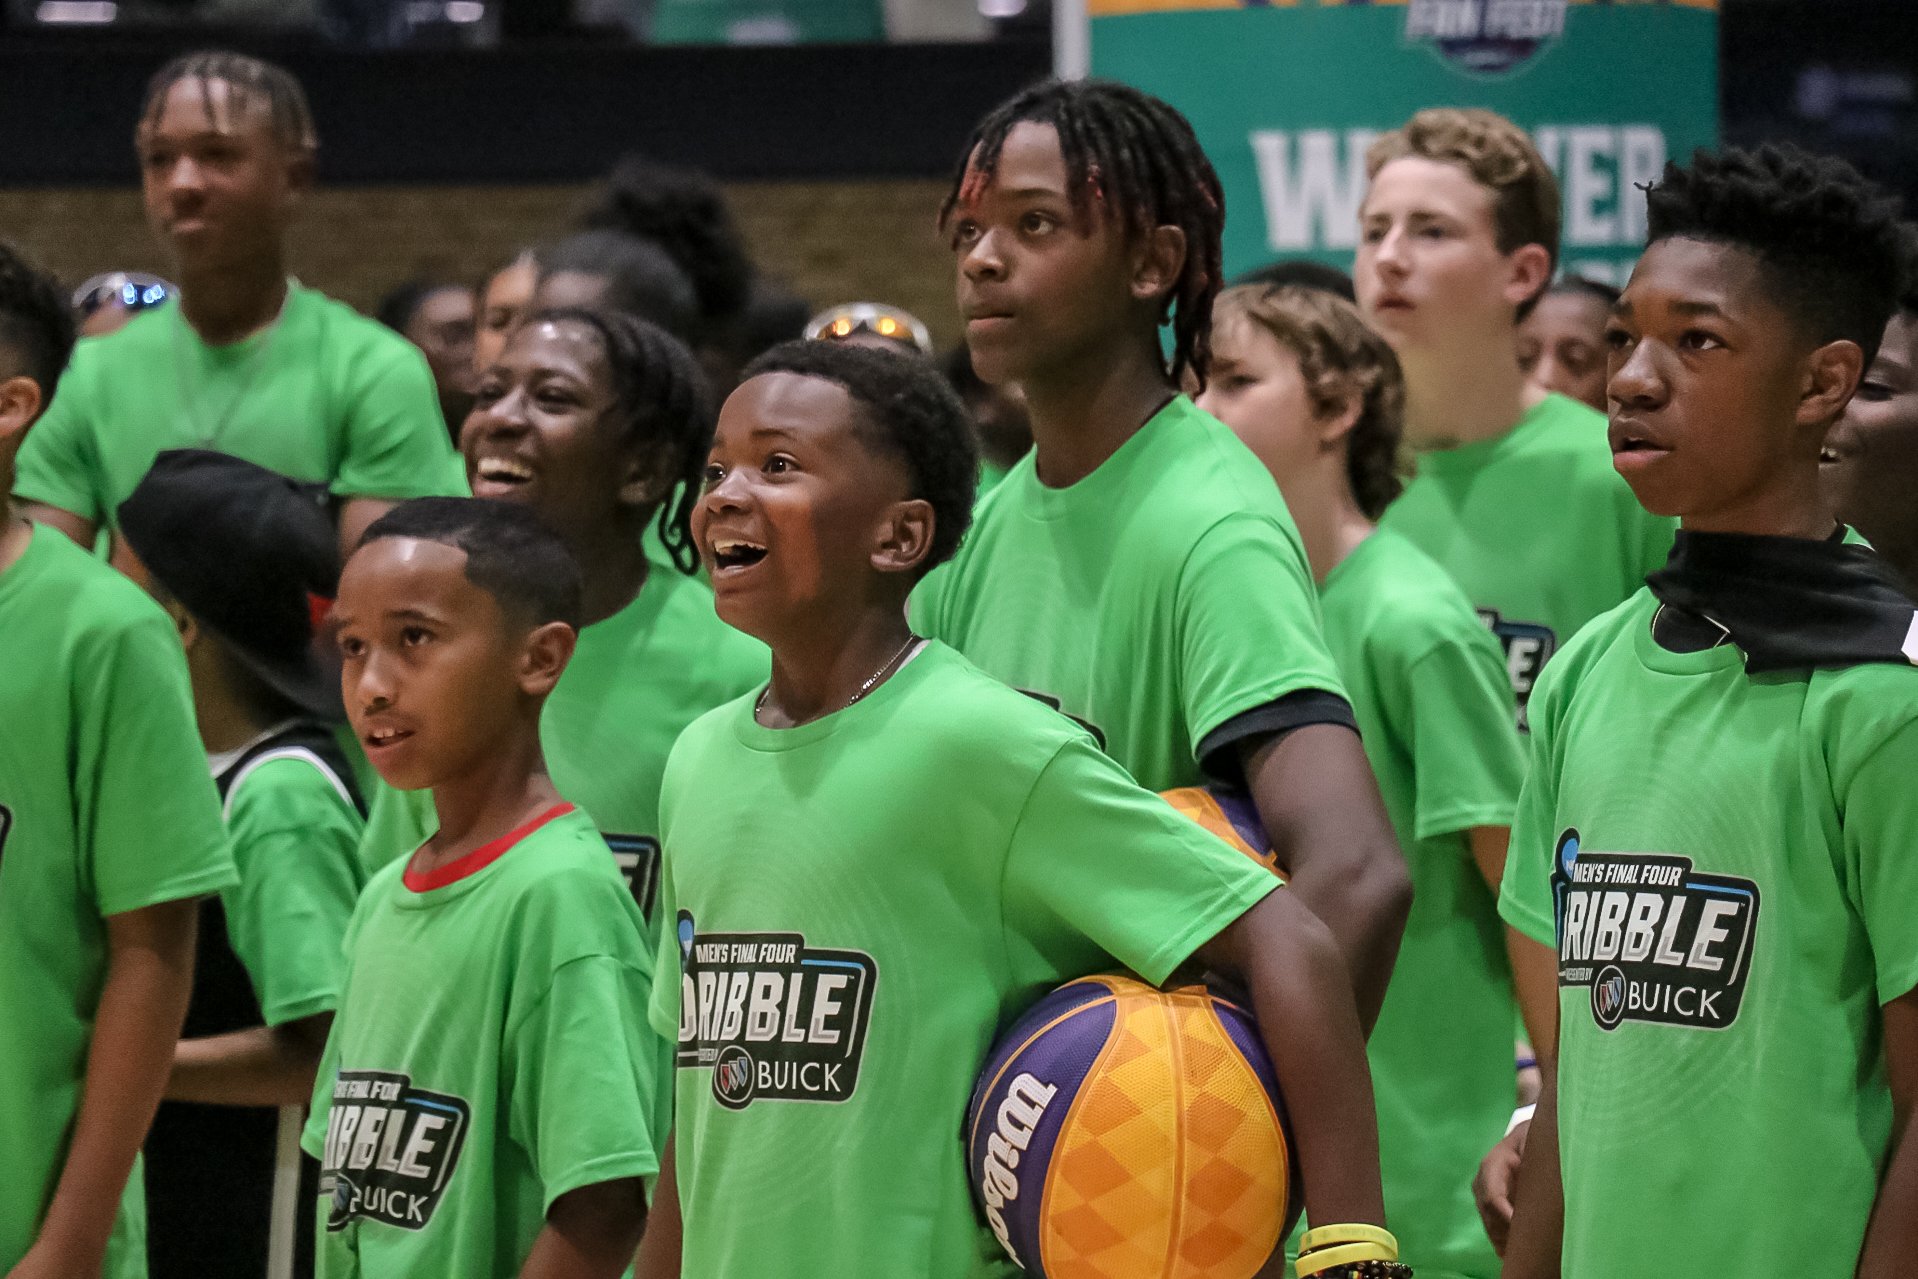 A group of young children  all wearing green shirts with a  dribble contest logo look to the left. Some smile and others look in amazement. 